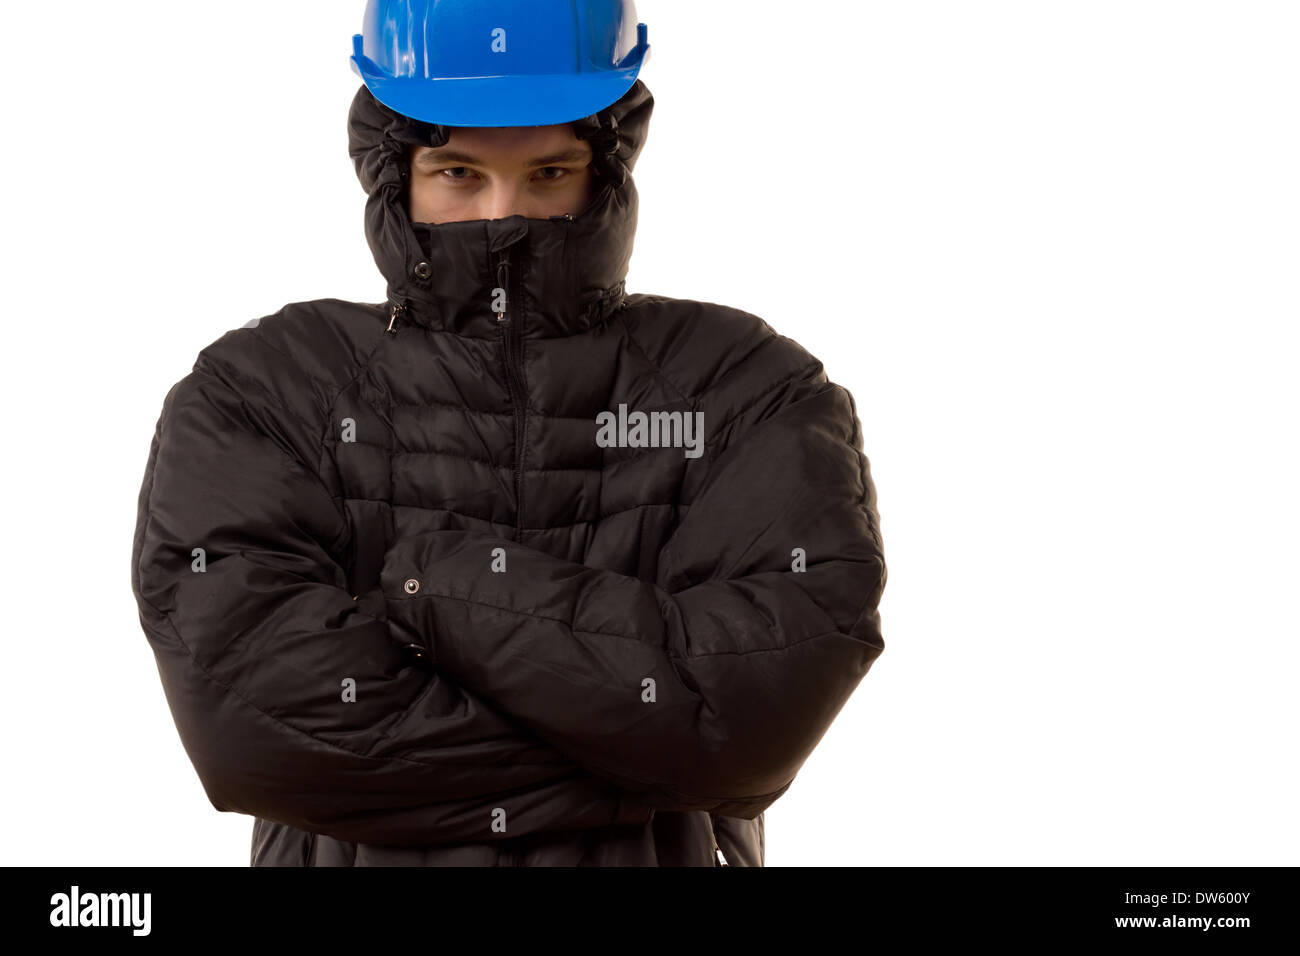 Pugnacious young thug in a black balaclava and hardhat standing blocking the way with an angry expression and with folded arms, Stock Photo